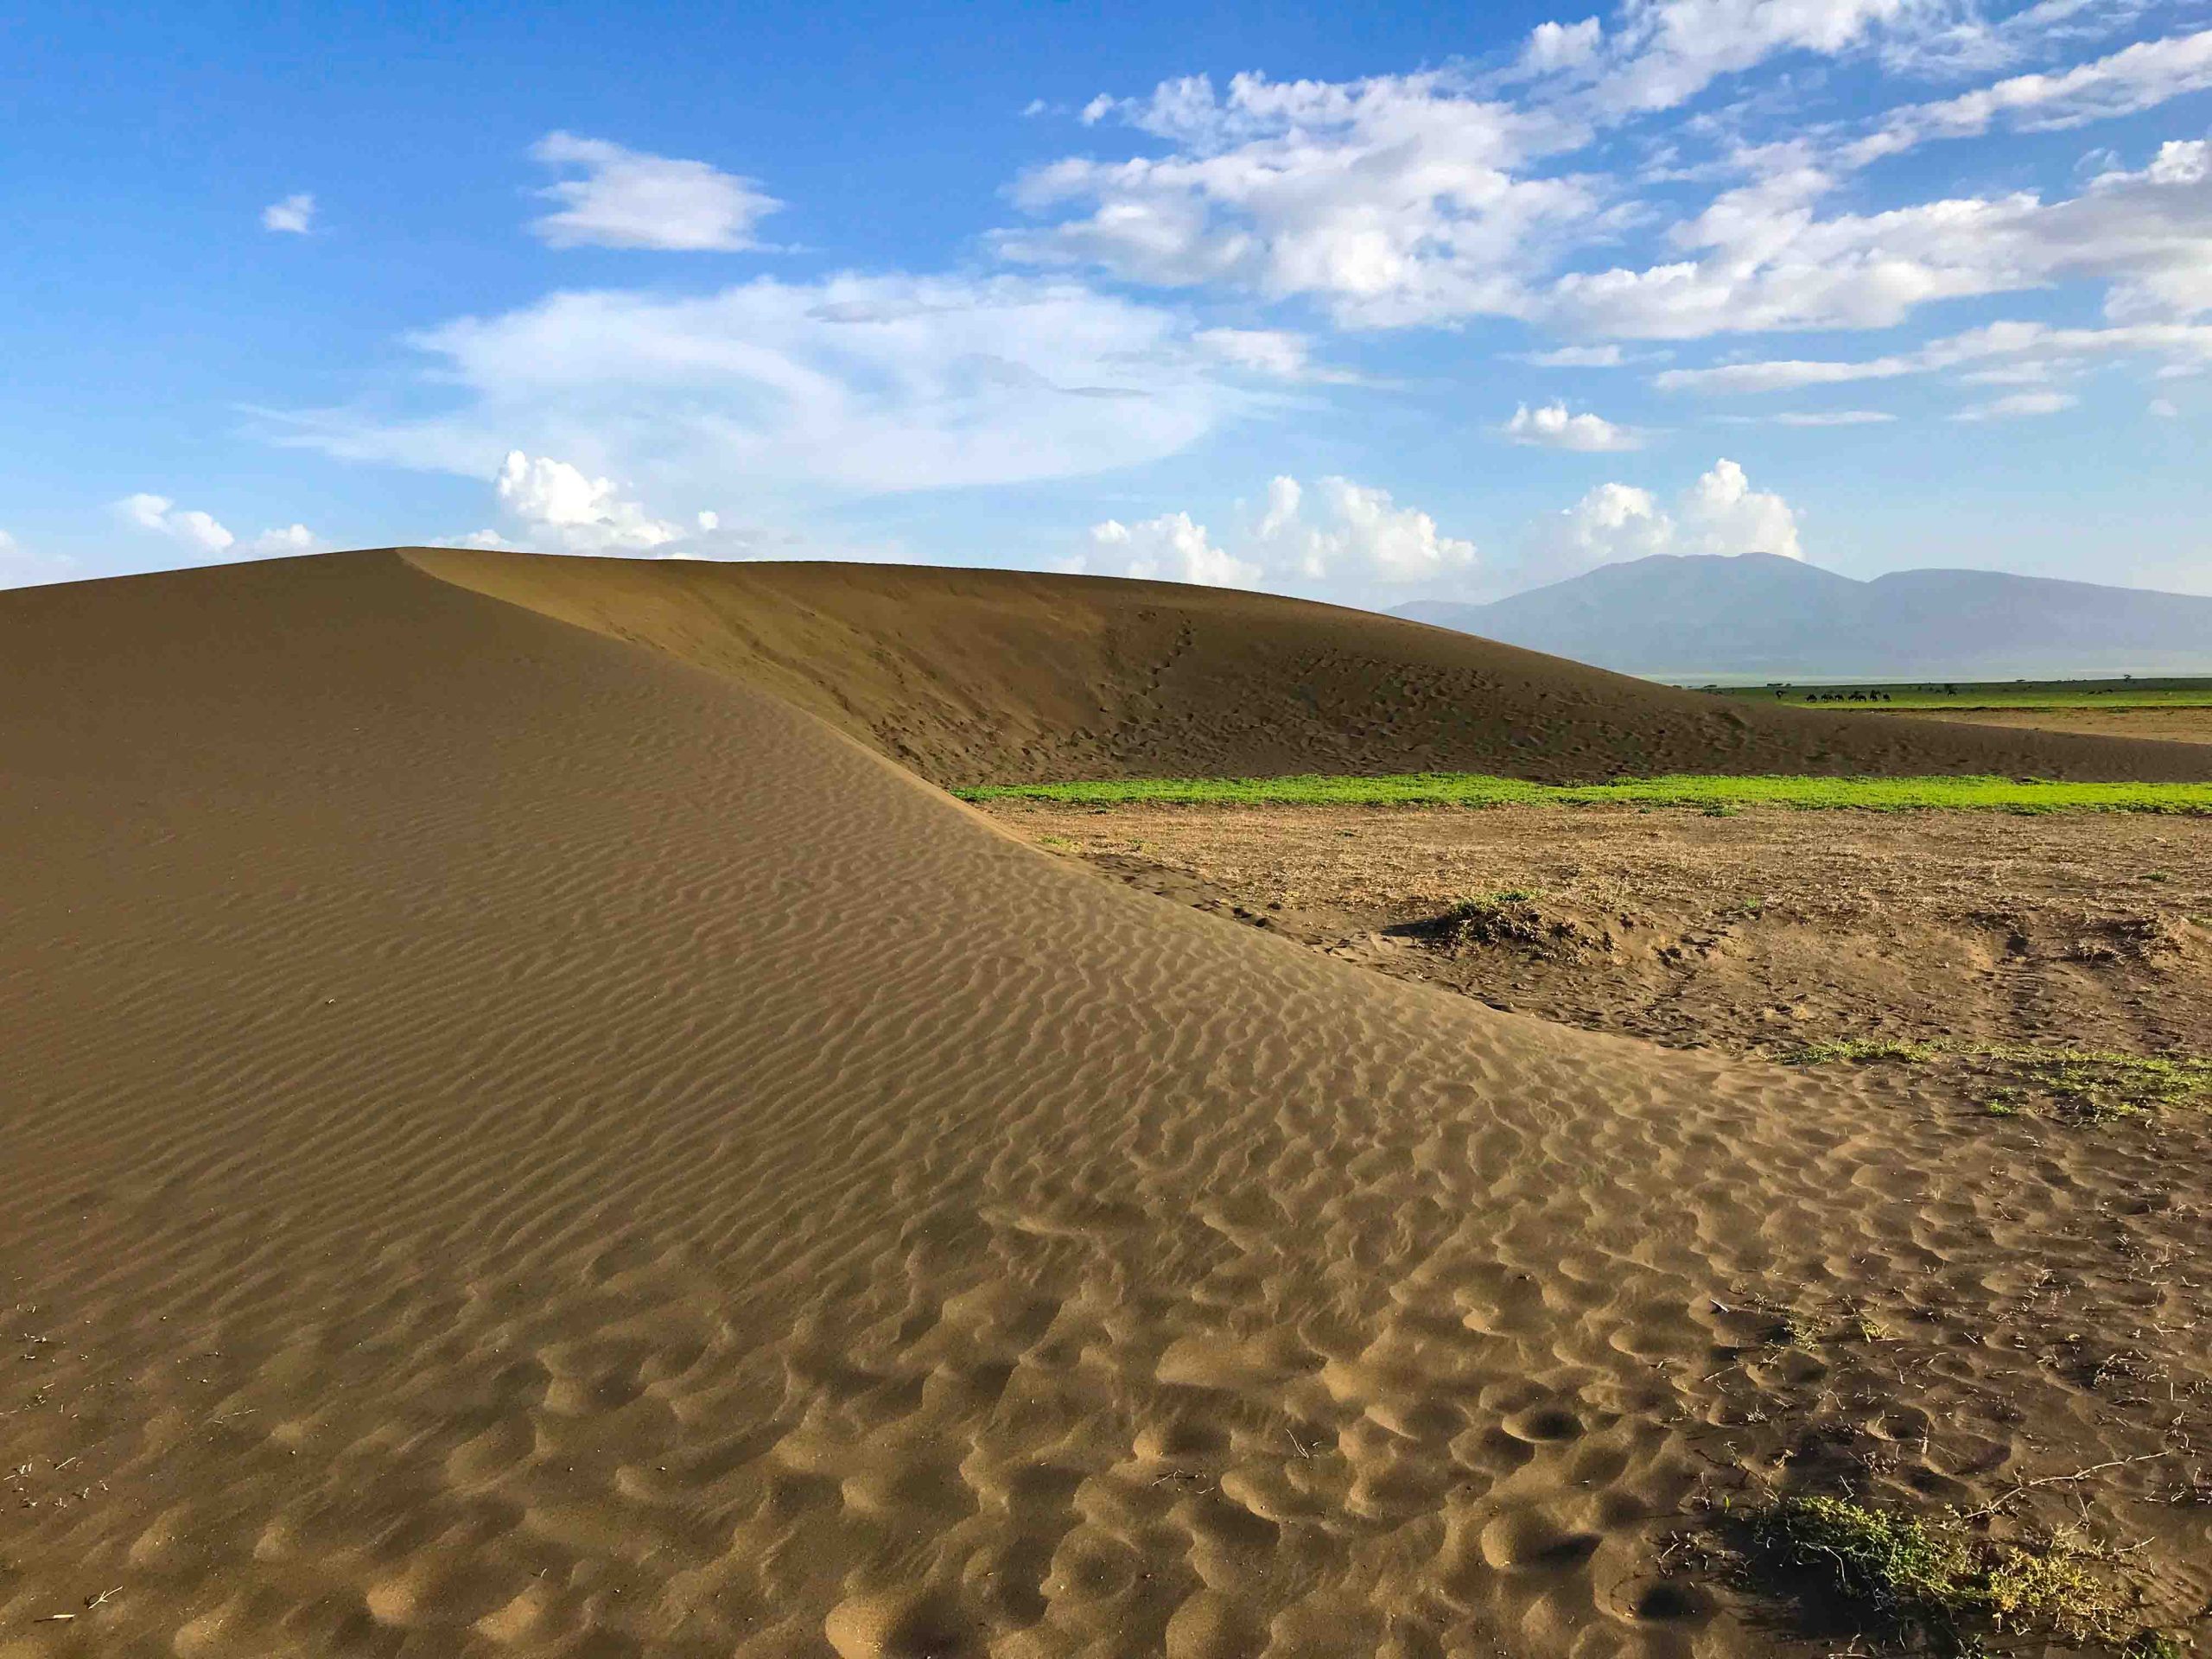 Explore The Shifting Sands in The Ngorongoro Conservation Area